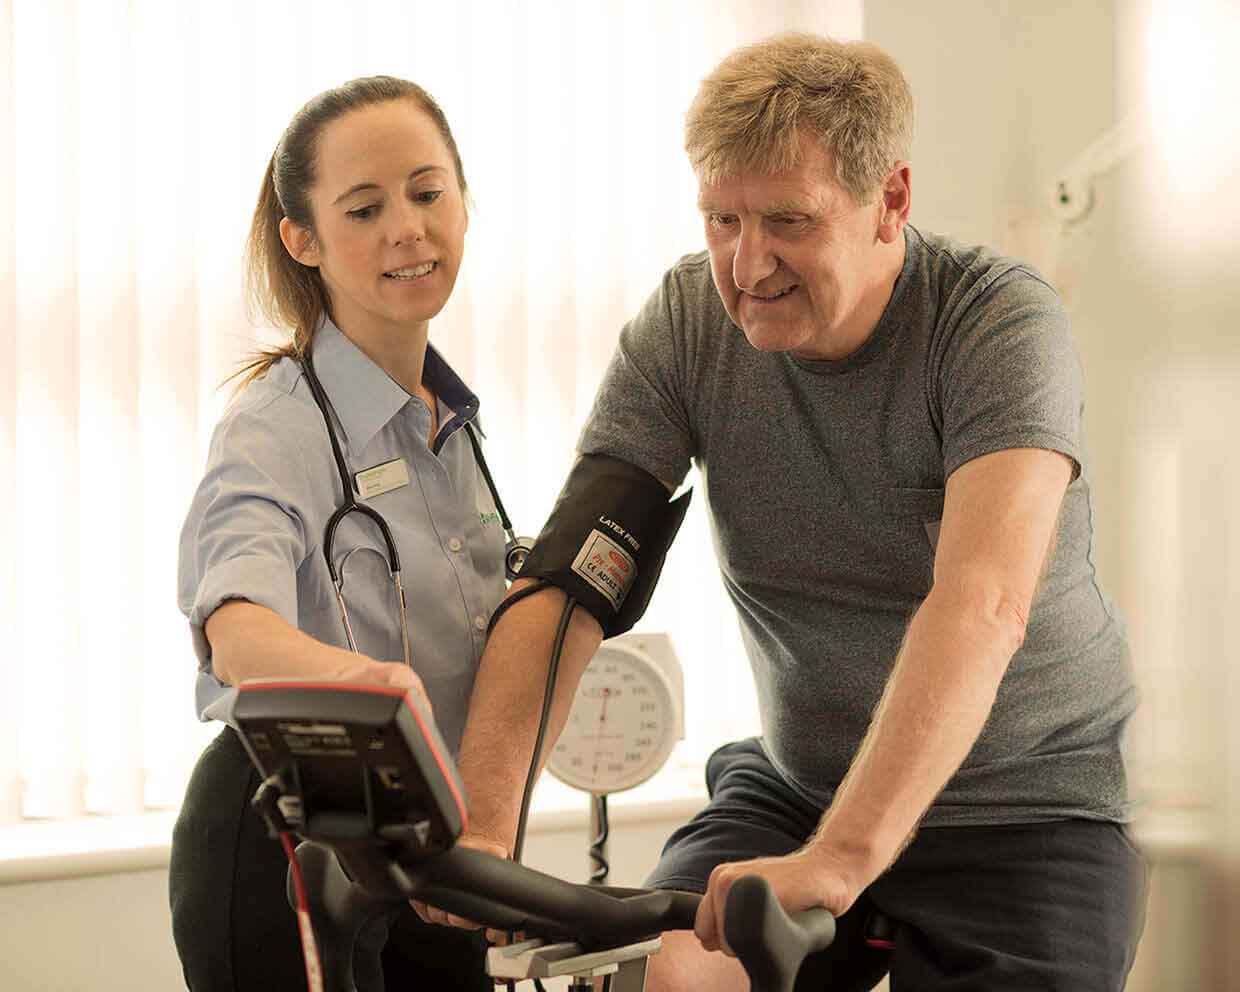 Older man on an exercise bike with health monitors attached to him